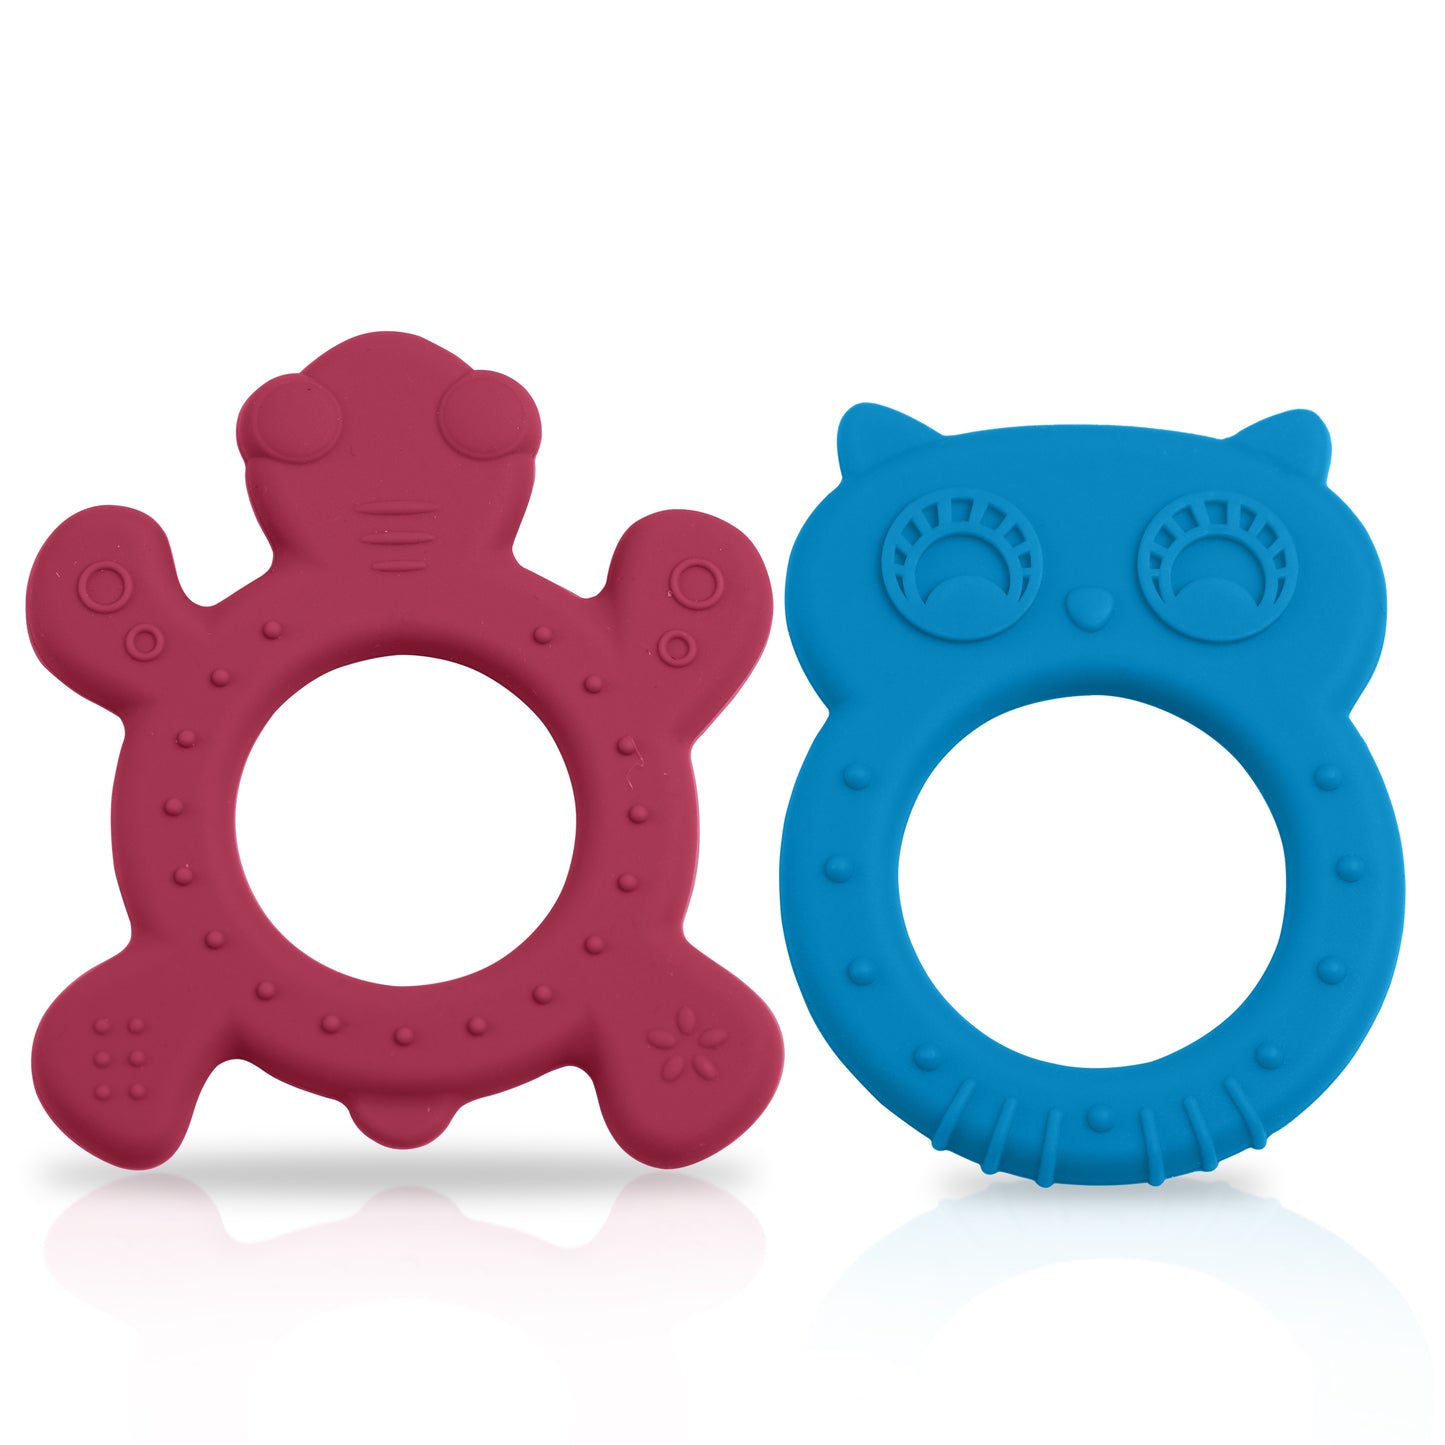 Baby Silicone Teether for teething gums, Dual Pack(Blue & Rubine Red)